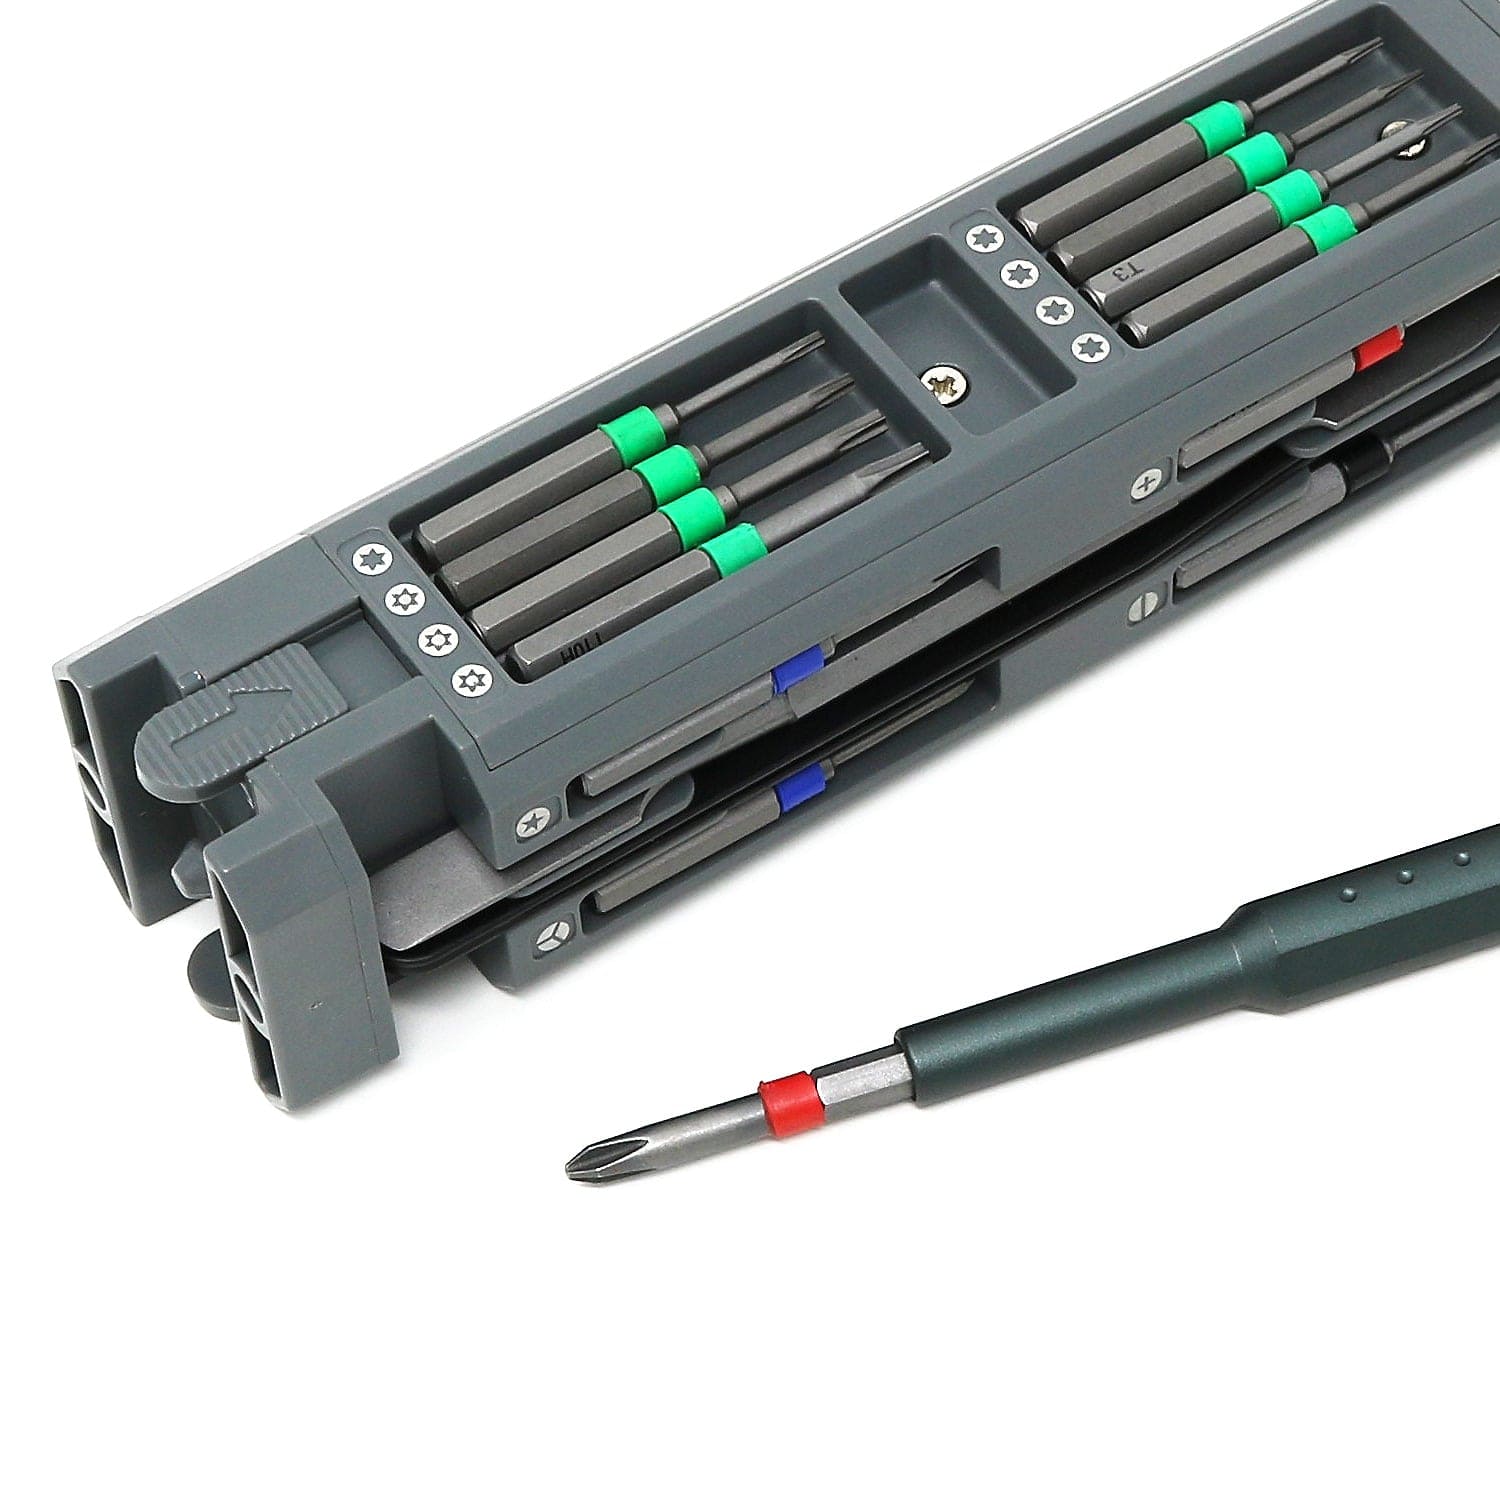 32-in-1 Compact Precision Screwdriver Set with Push Eject - The Pi Hut